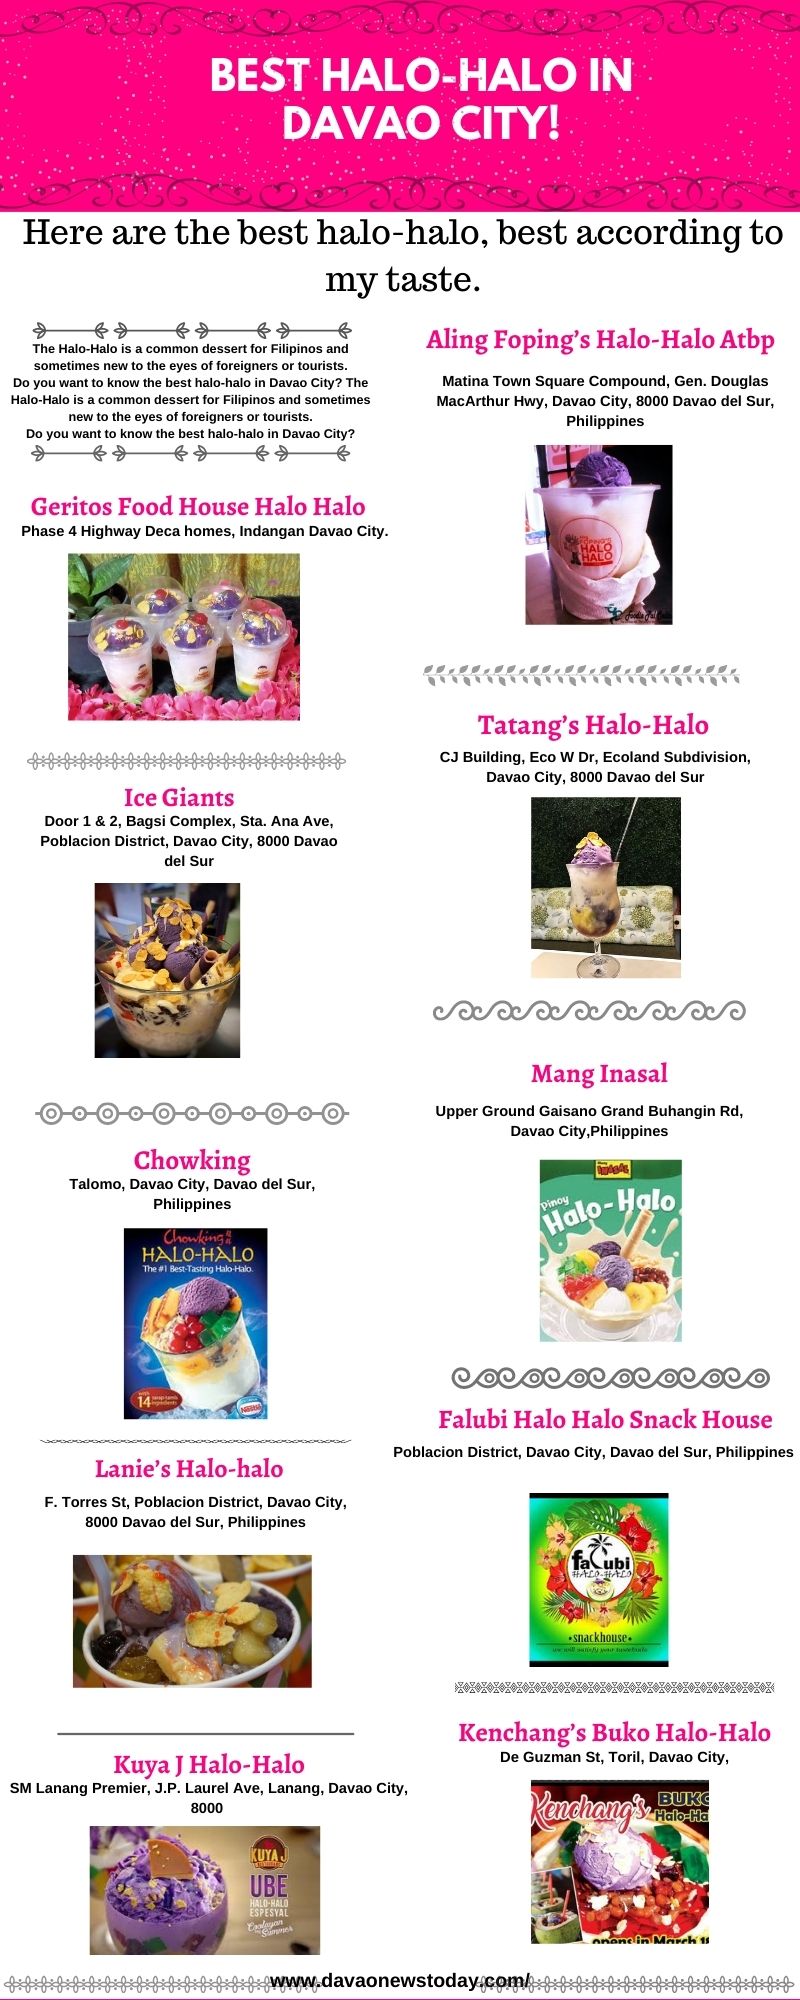 Top 10 Best Halo Halo in Davao City 2